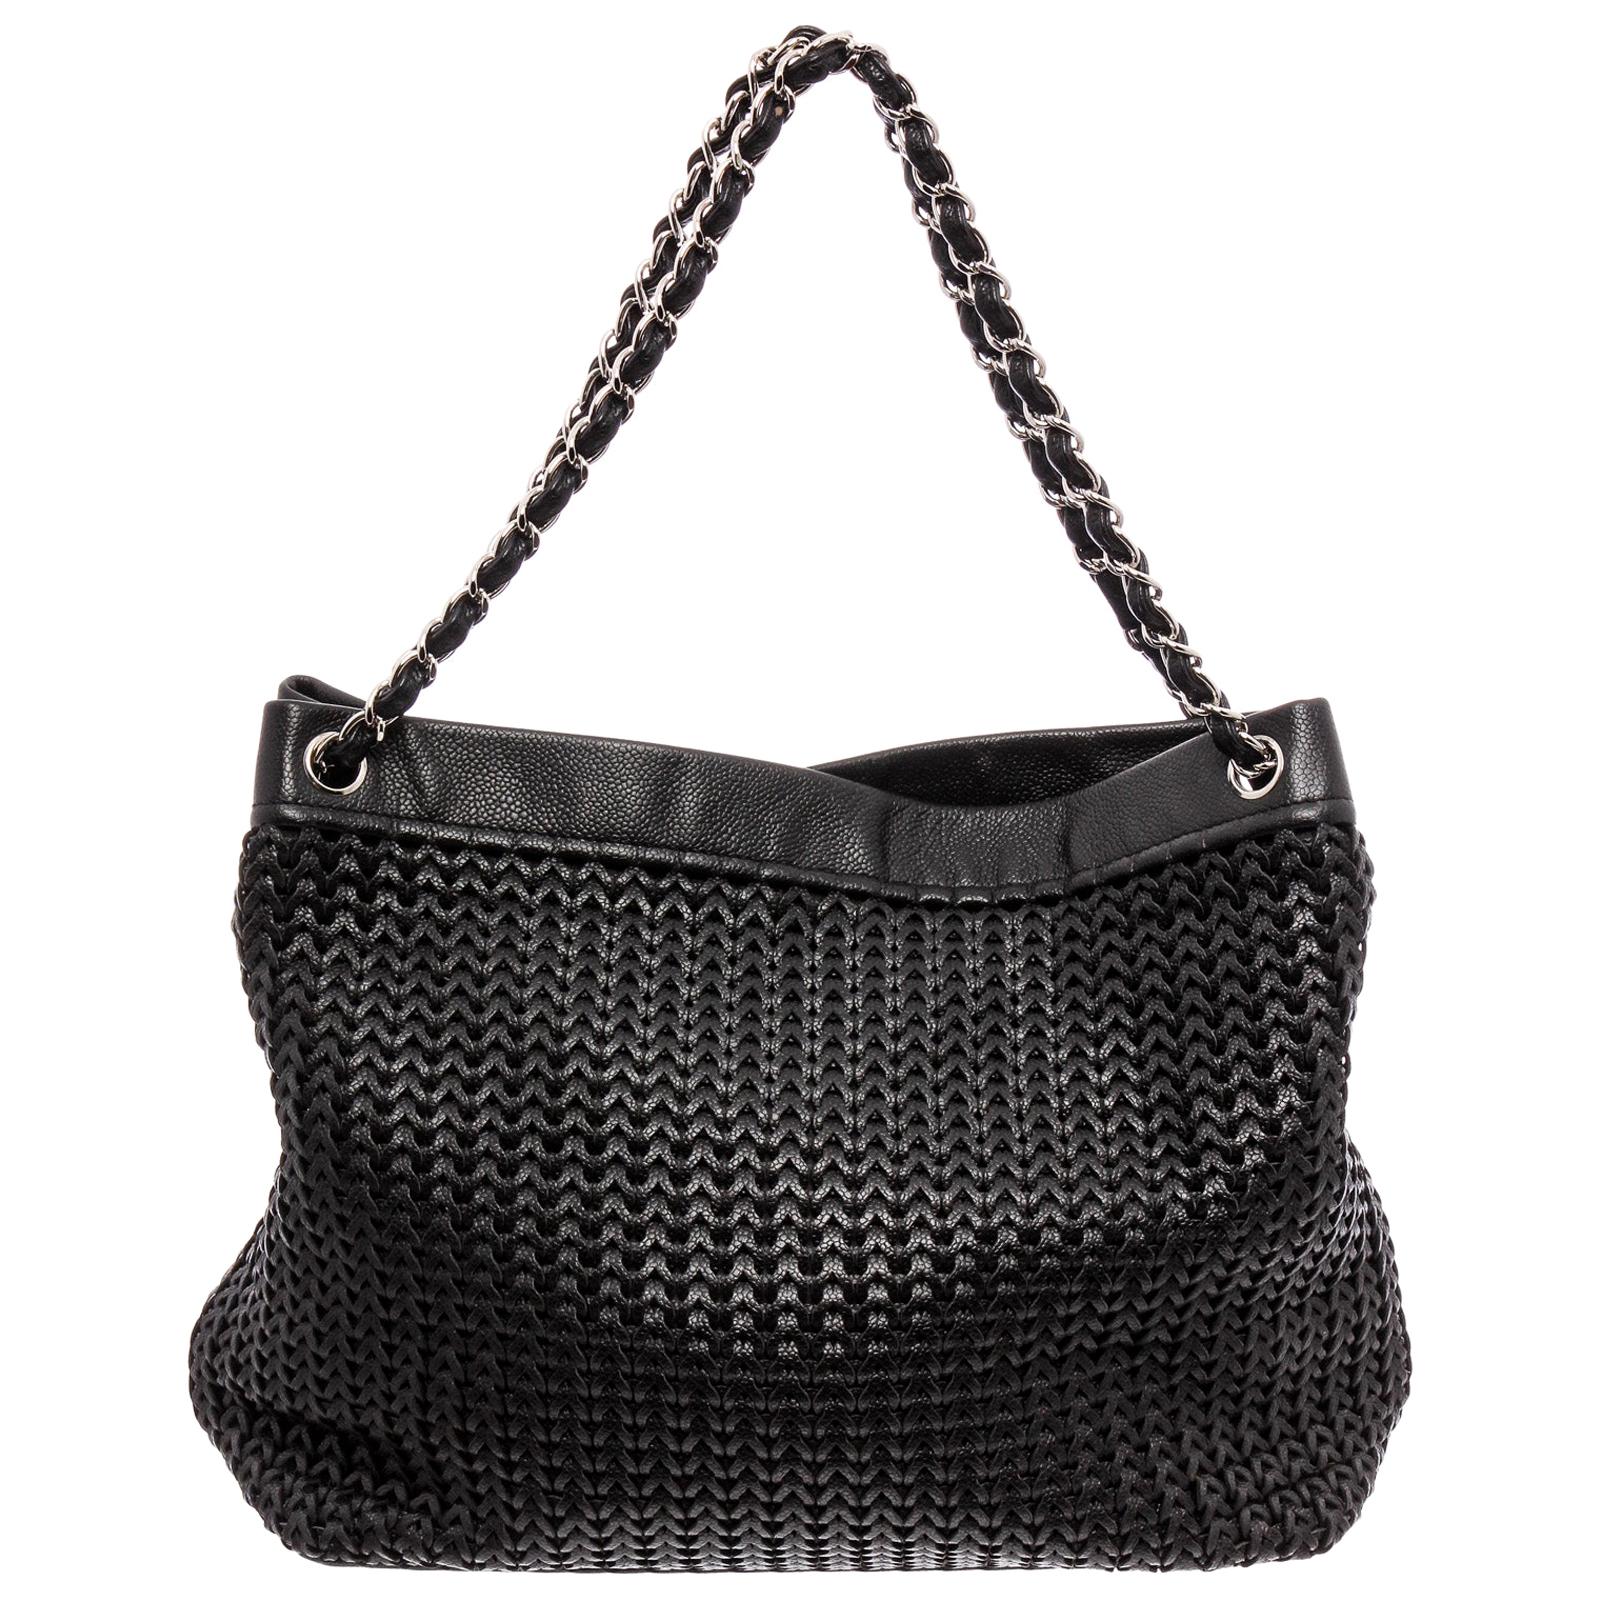 Chanel Black Woven Braided Leather CC Silver Chain Tote Shoulder